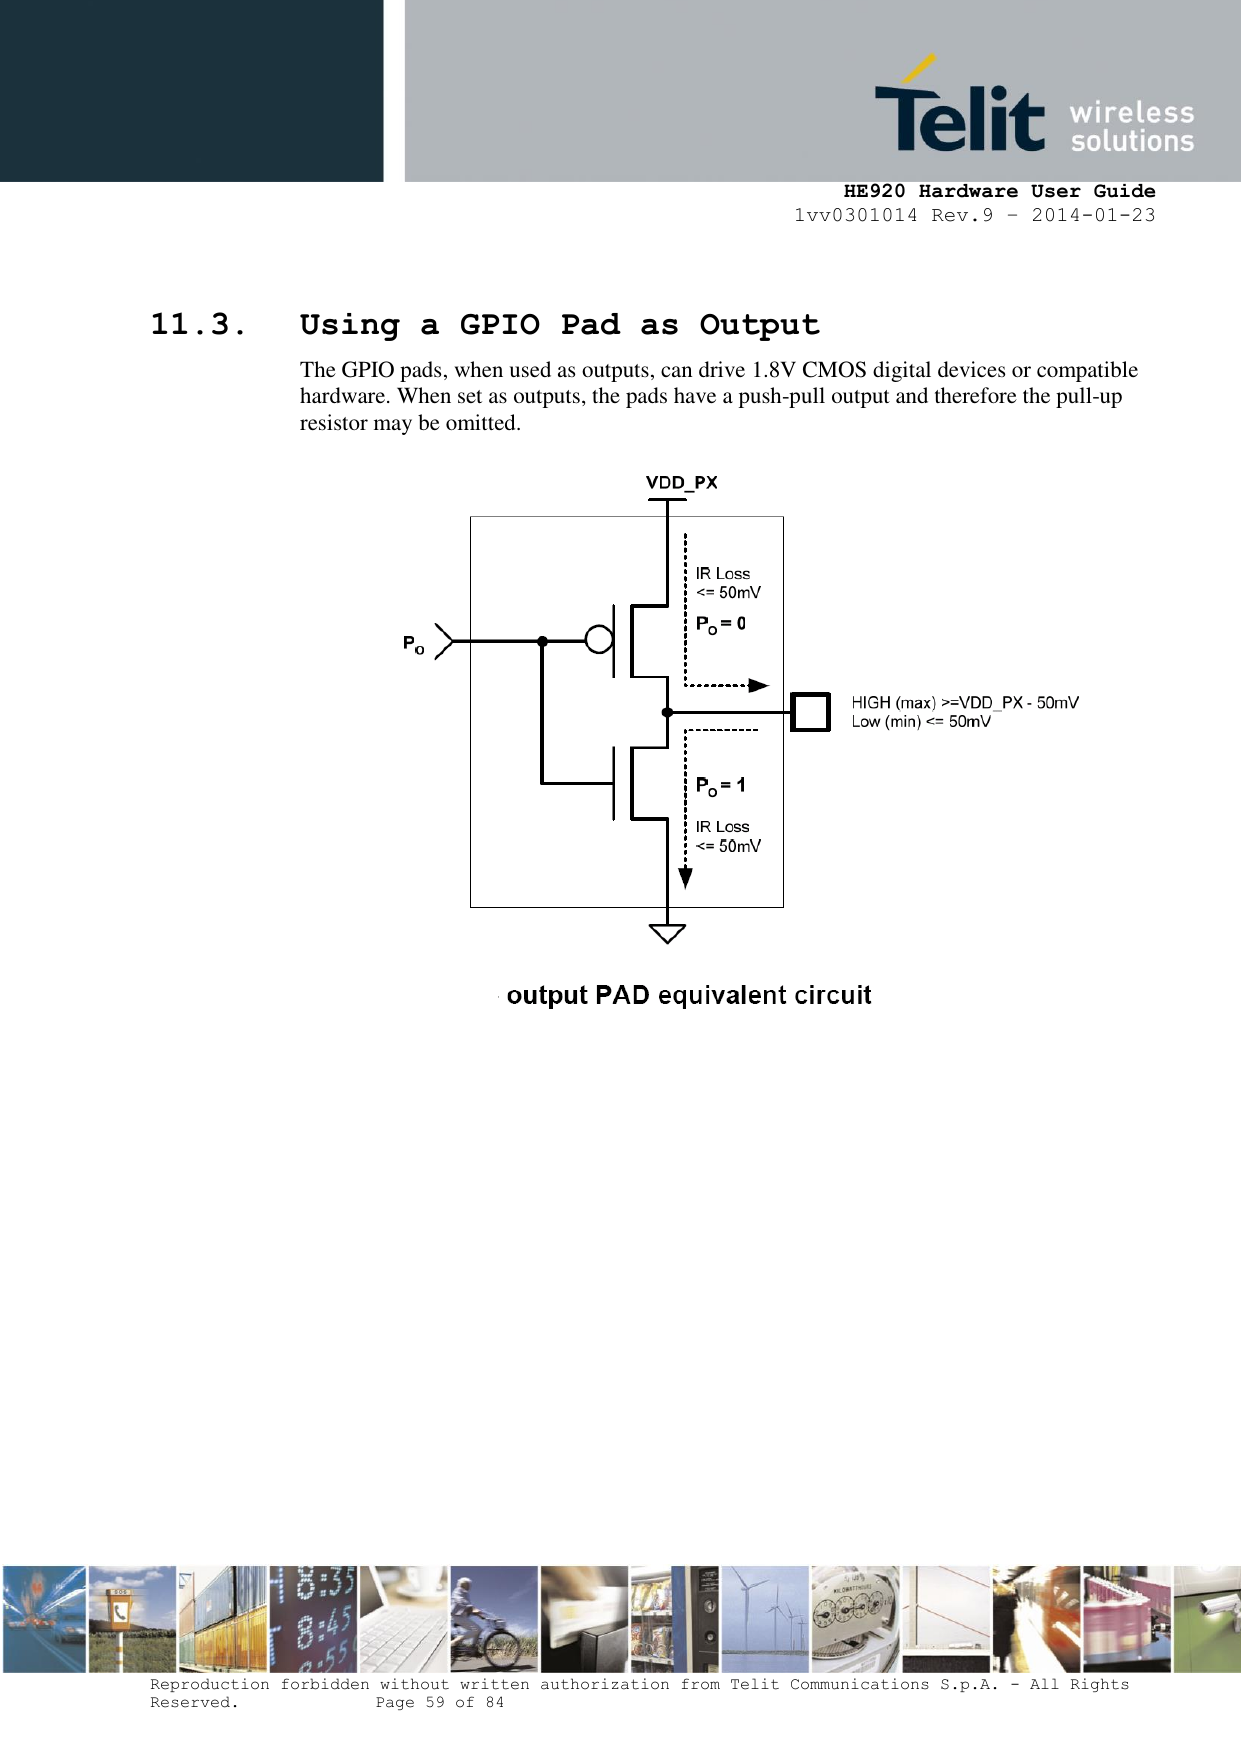     HE920 Hardware User Guide 1vv0301014 Rev.9 – 2014-01-23 Reproduction forbidden without written authorization from Telit Communications S.p.A. - All Rights Reserved.    Page 59 of 84   11.3. Using a GPIO Pad as Output The GPIO pads, when used as outputs, can drive 1.8V CMOS digital devices or compatible hardware. When set as outputs, the pads have a push-pull output and therefore the pull-up resistor may be omitted.  